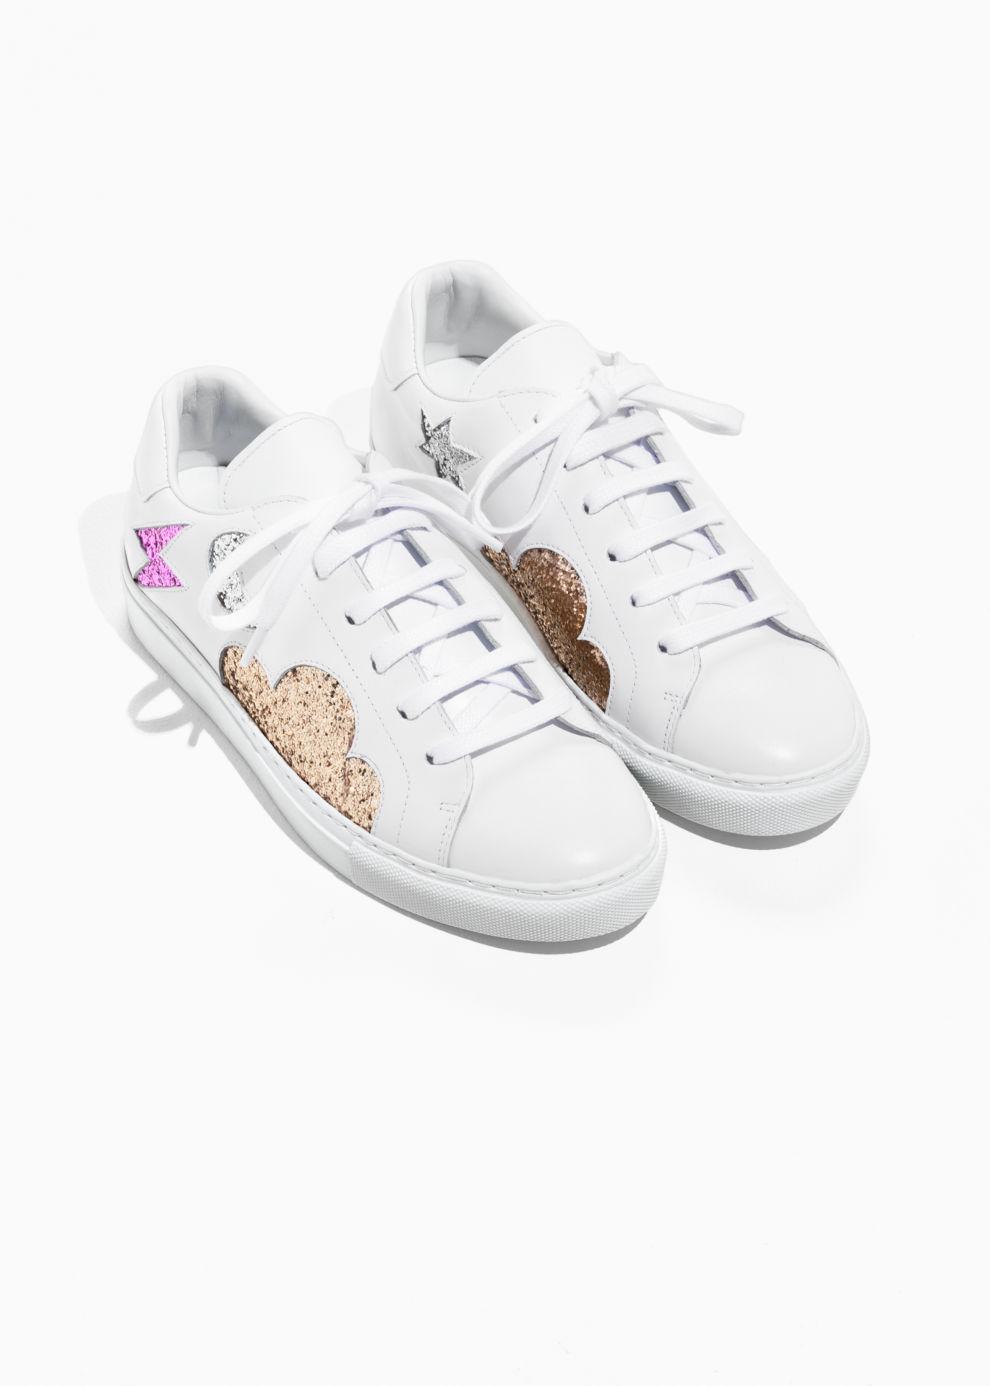 \u0026 Other Stories Leather Glitter Sneaker 